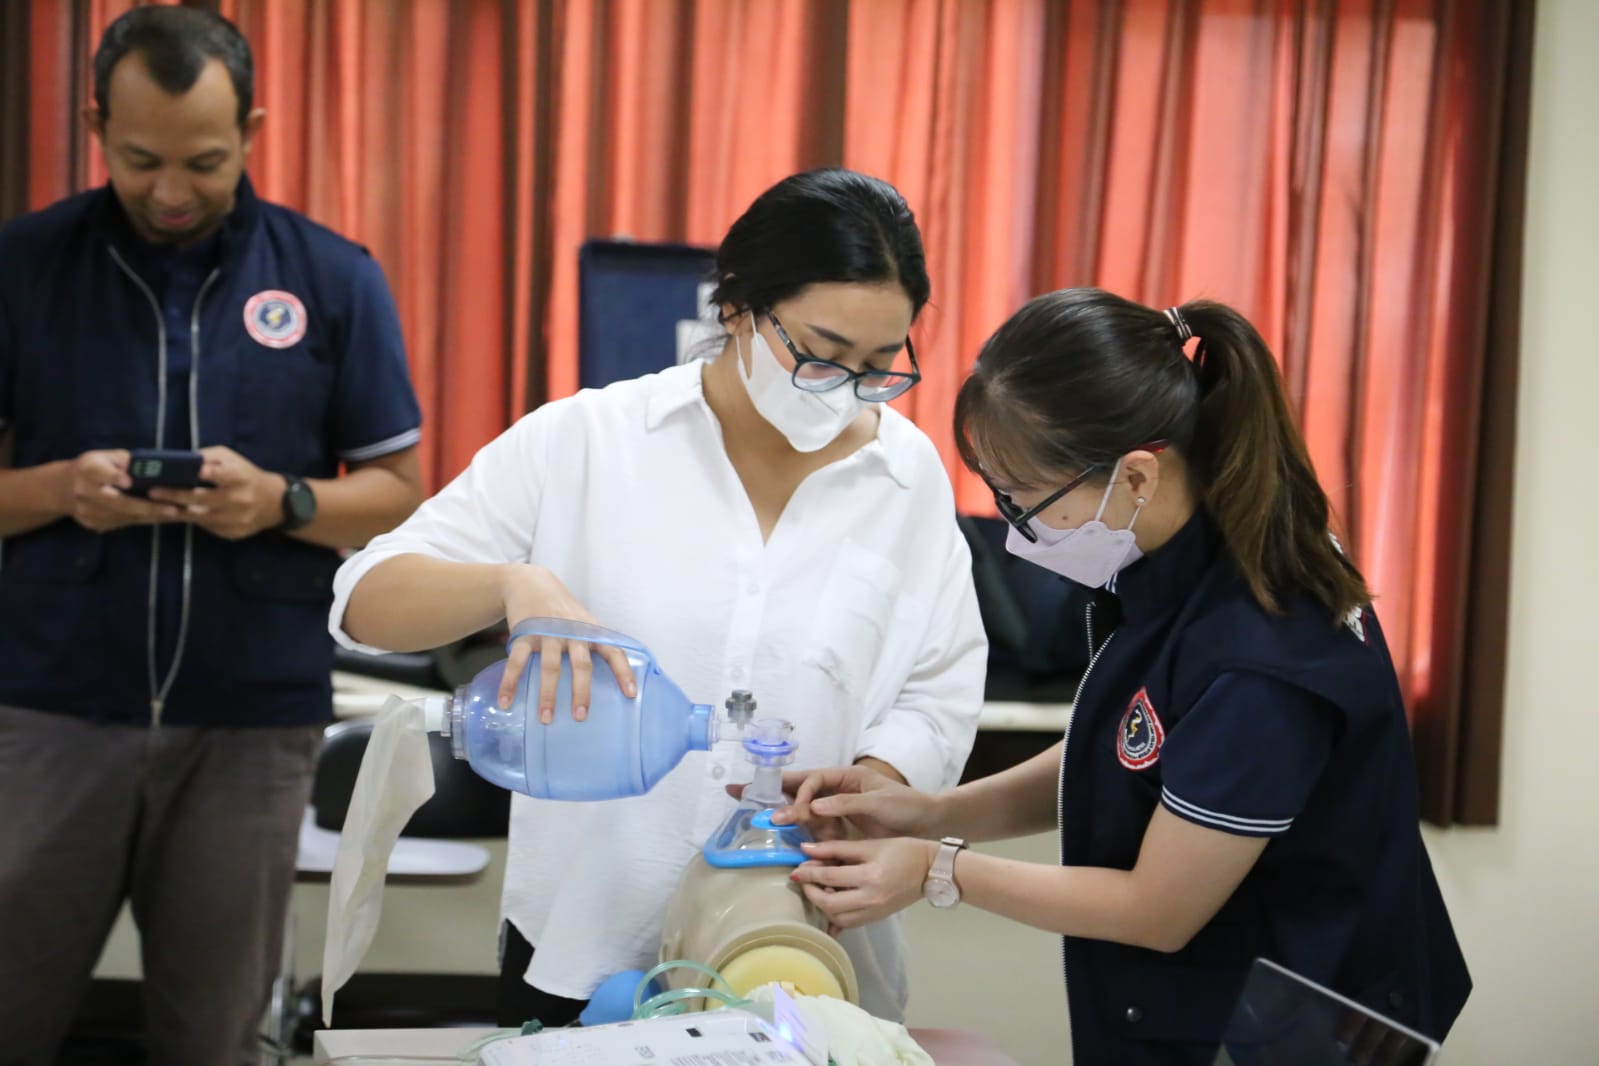 Emergency Clinical Skills Training for Specialist Study Program Students at Udayana University's Faculty of Medicine